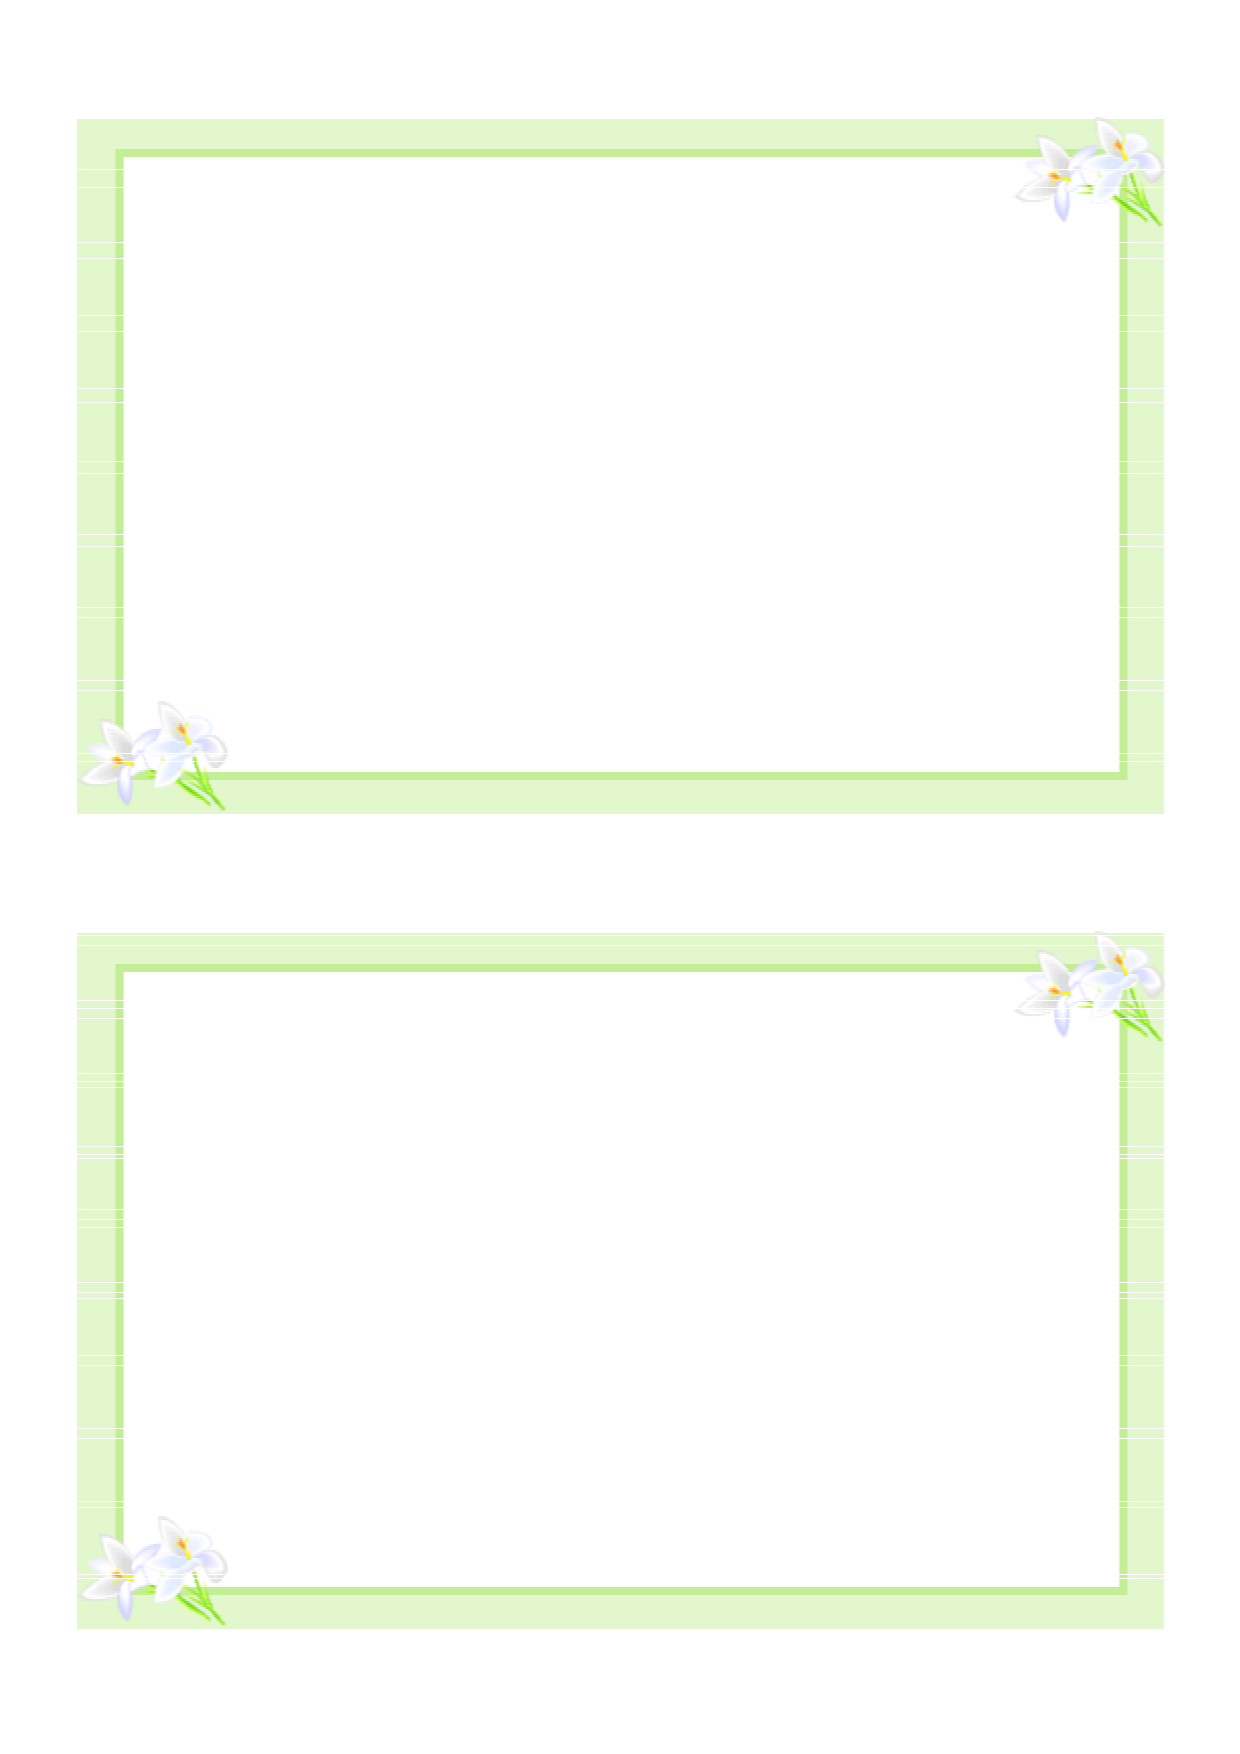 7 Best Images of Free Printable Blank Note Cards Template ...